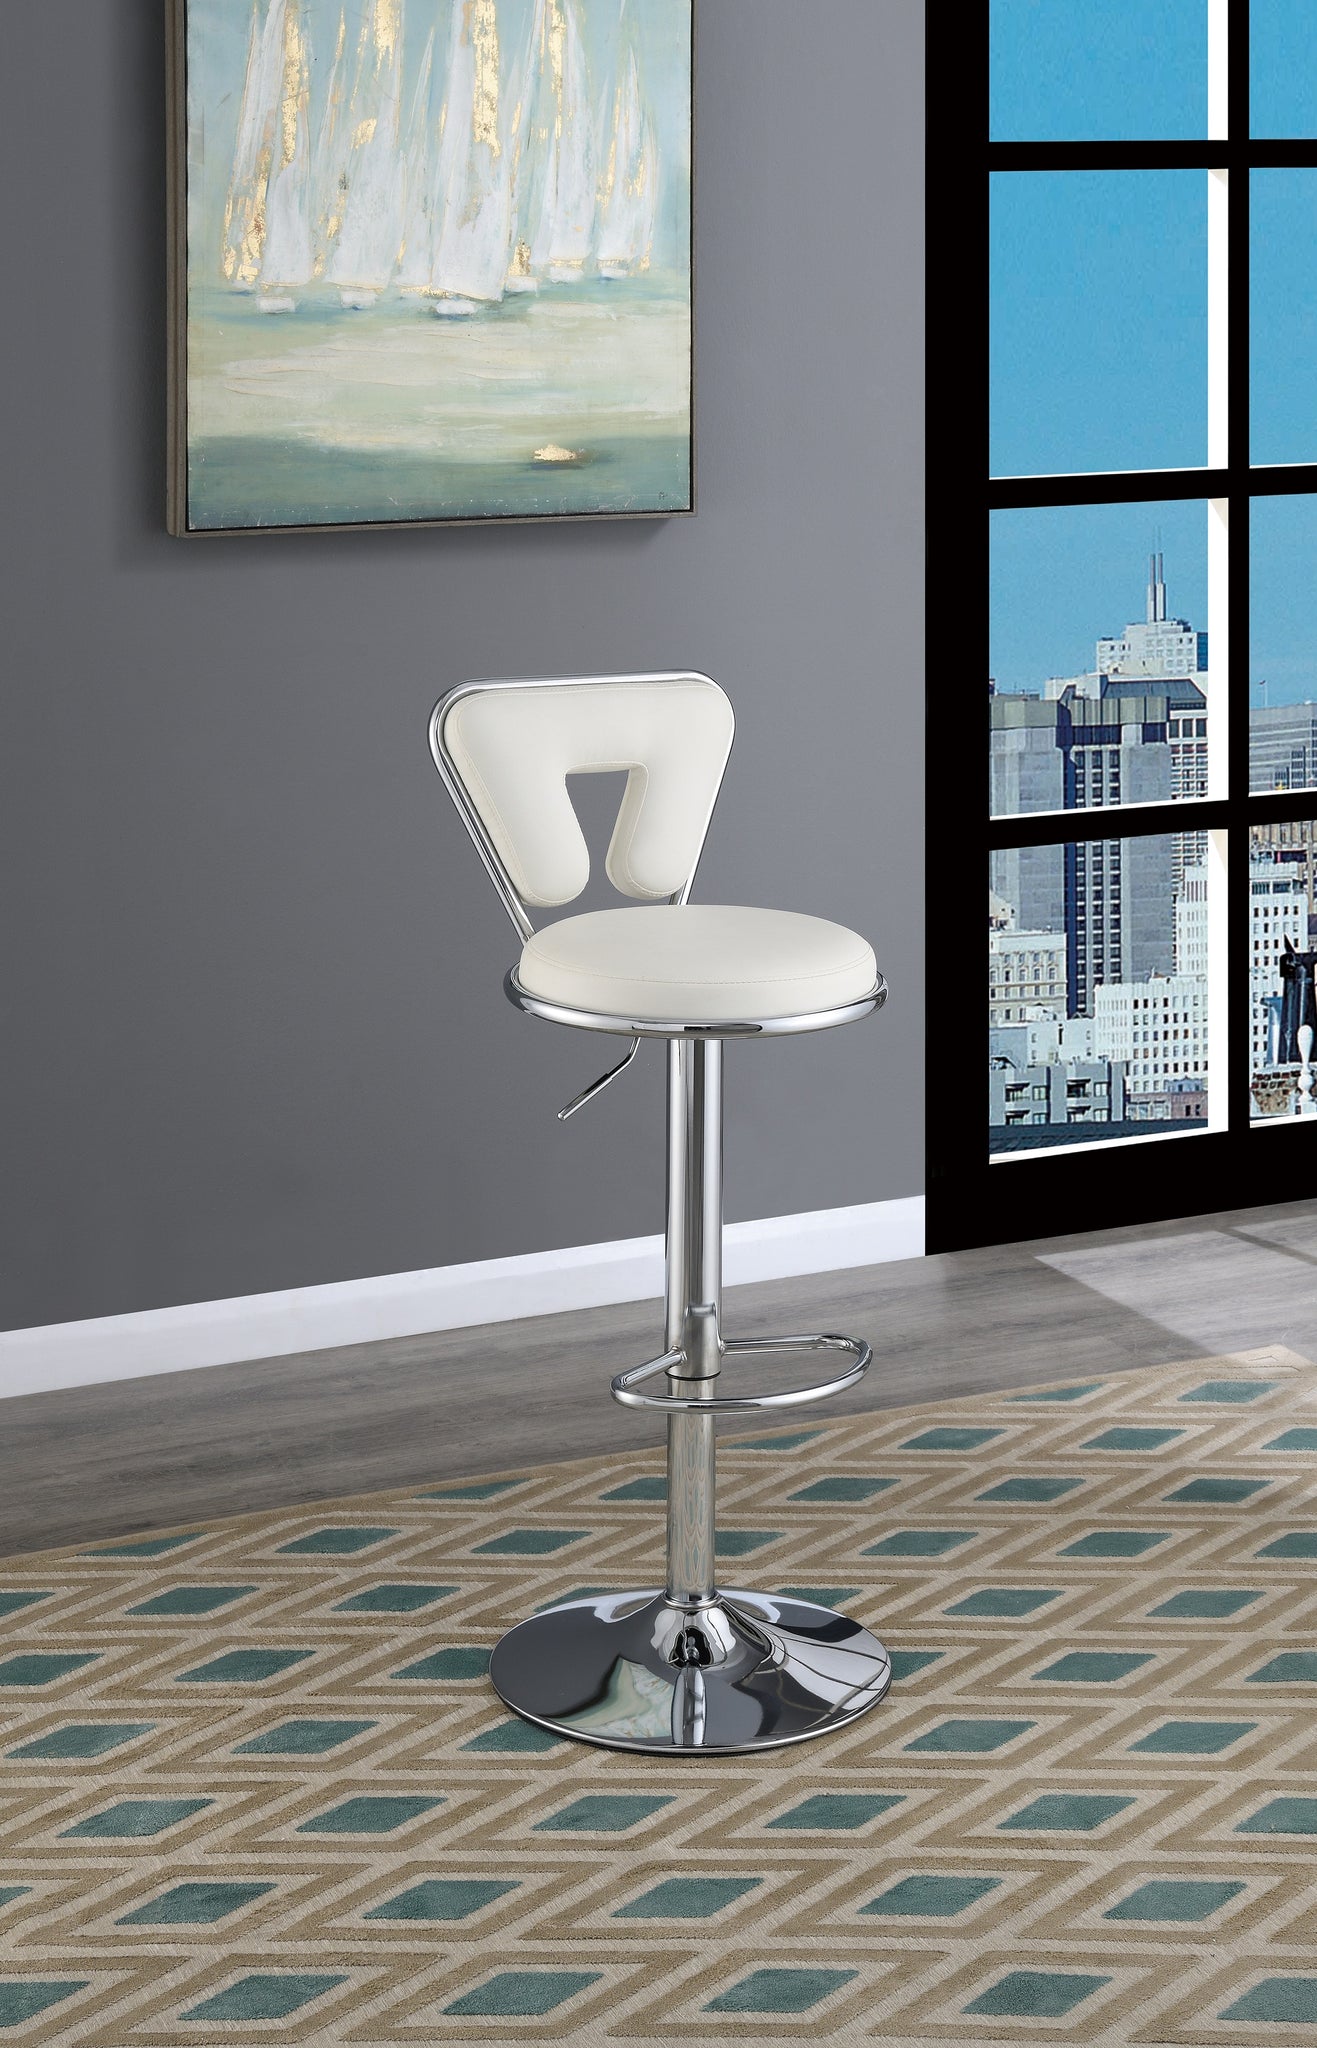 Adjustable Bar stool Gas lift Chair White Faux Leather white-dining room-classic-contemporary-modern-bar